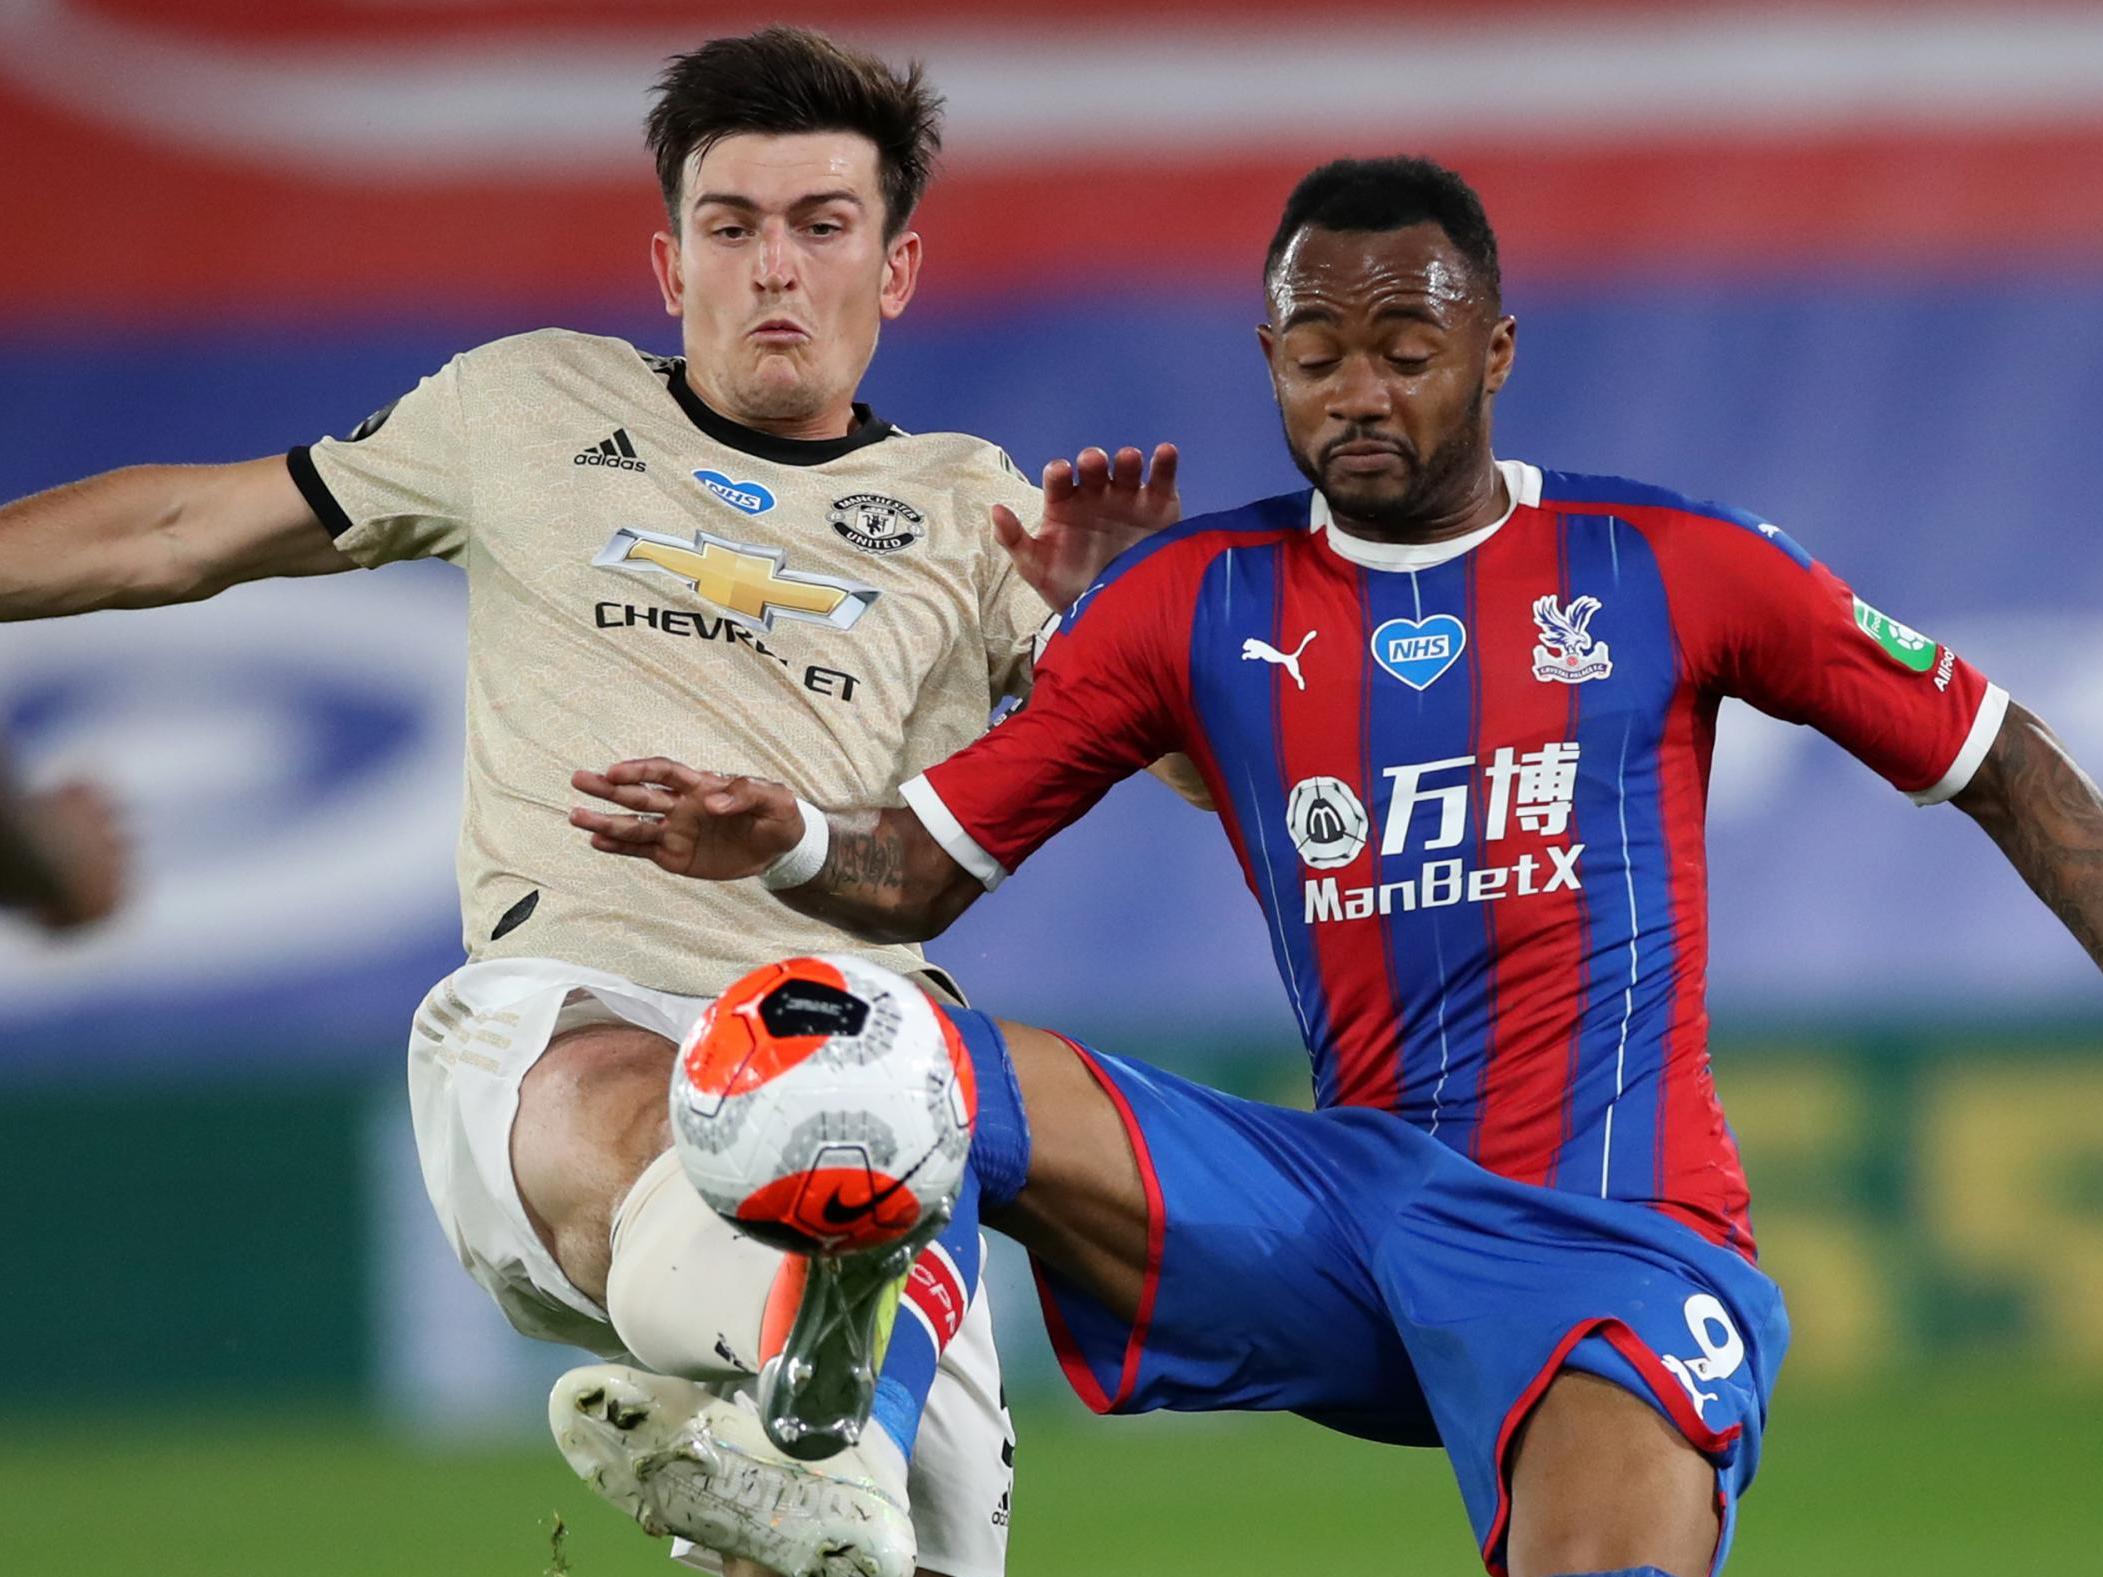 United captain Harry Maguire vies for the ball with Palace’s Jordan Ayew